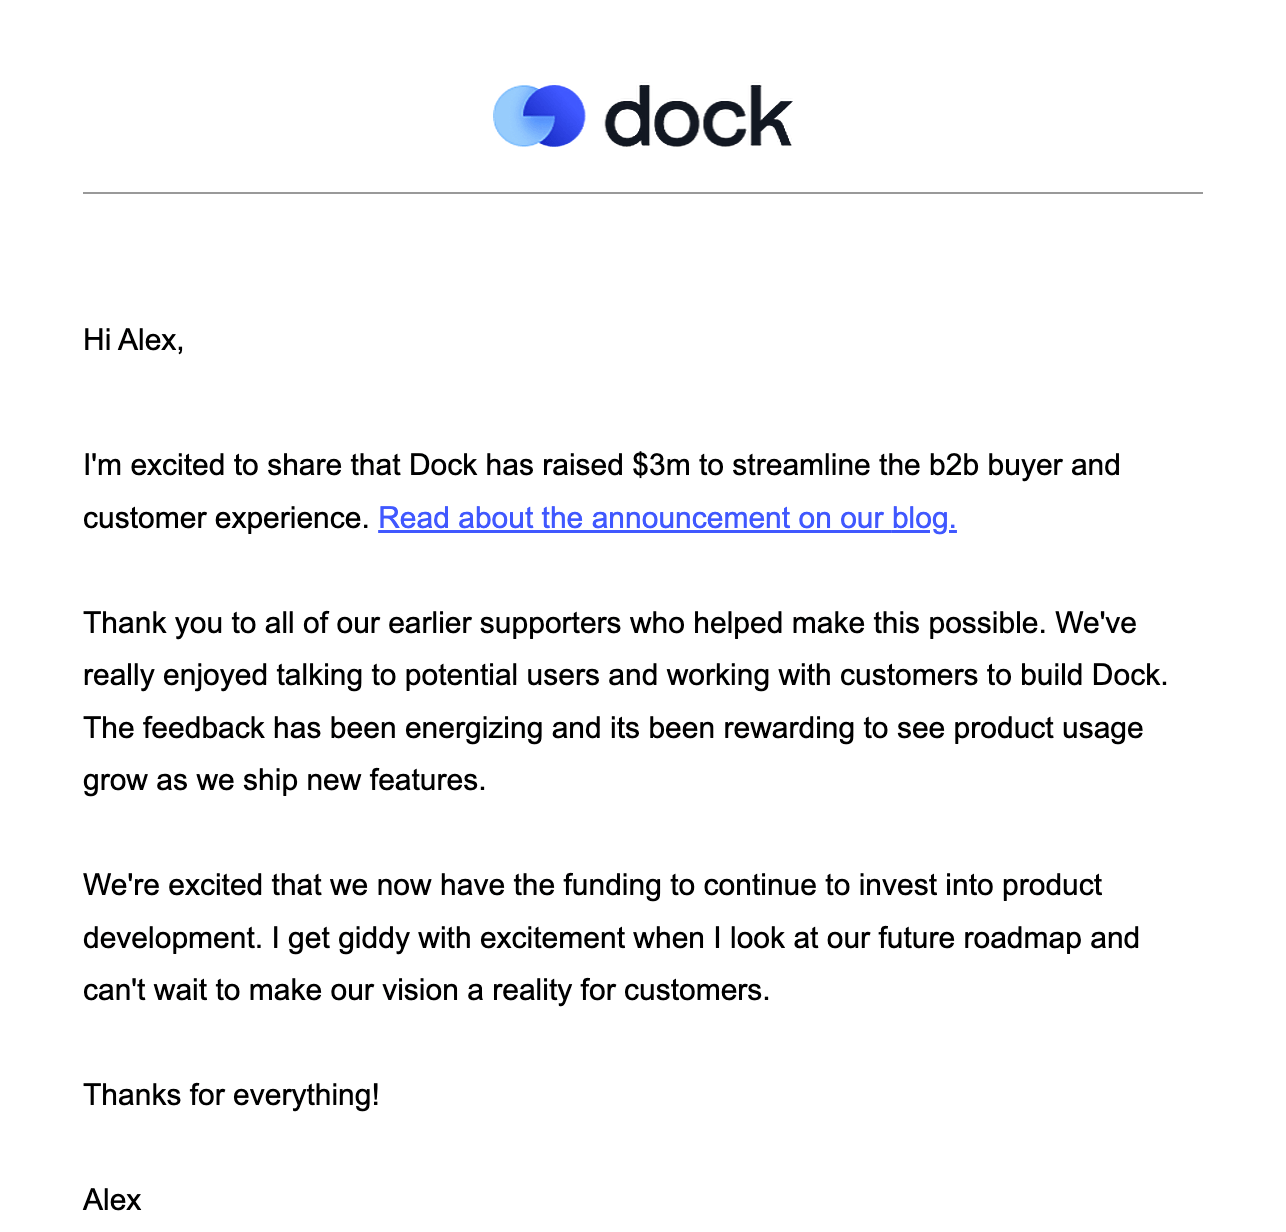 Funding Round Announcement Emails: Screenshot of Dock's funding round announcement email